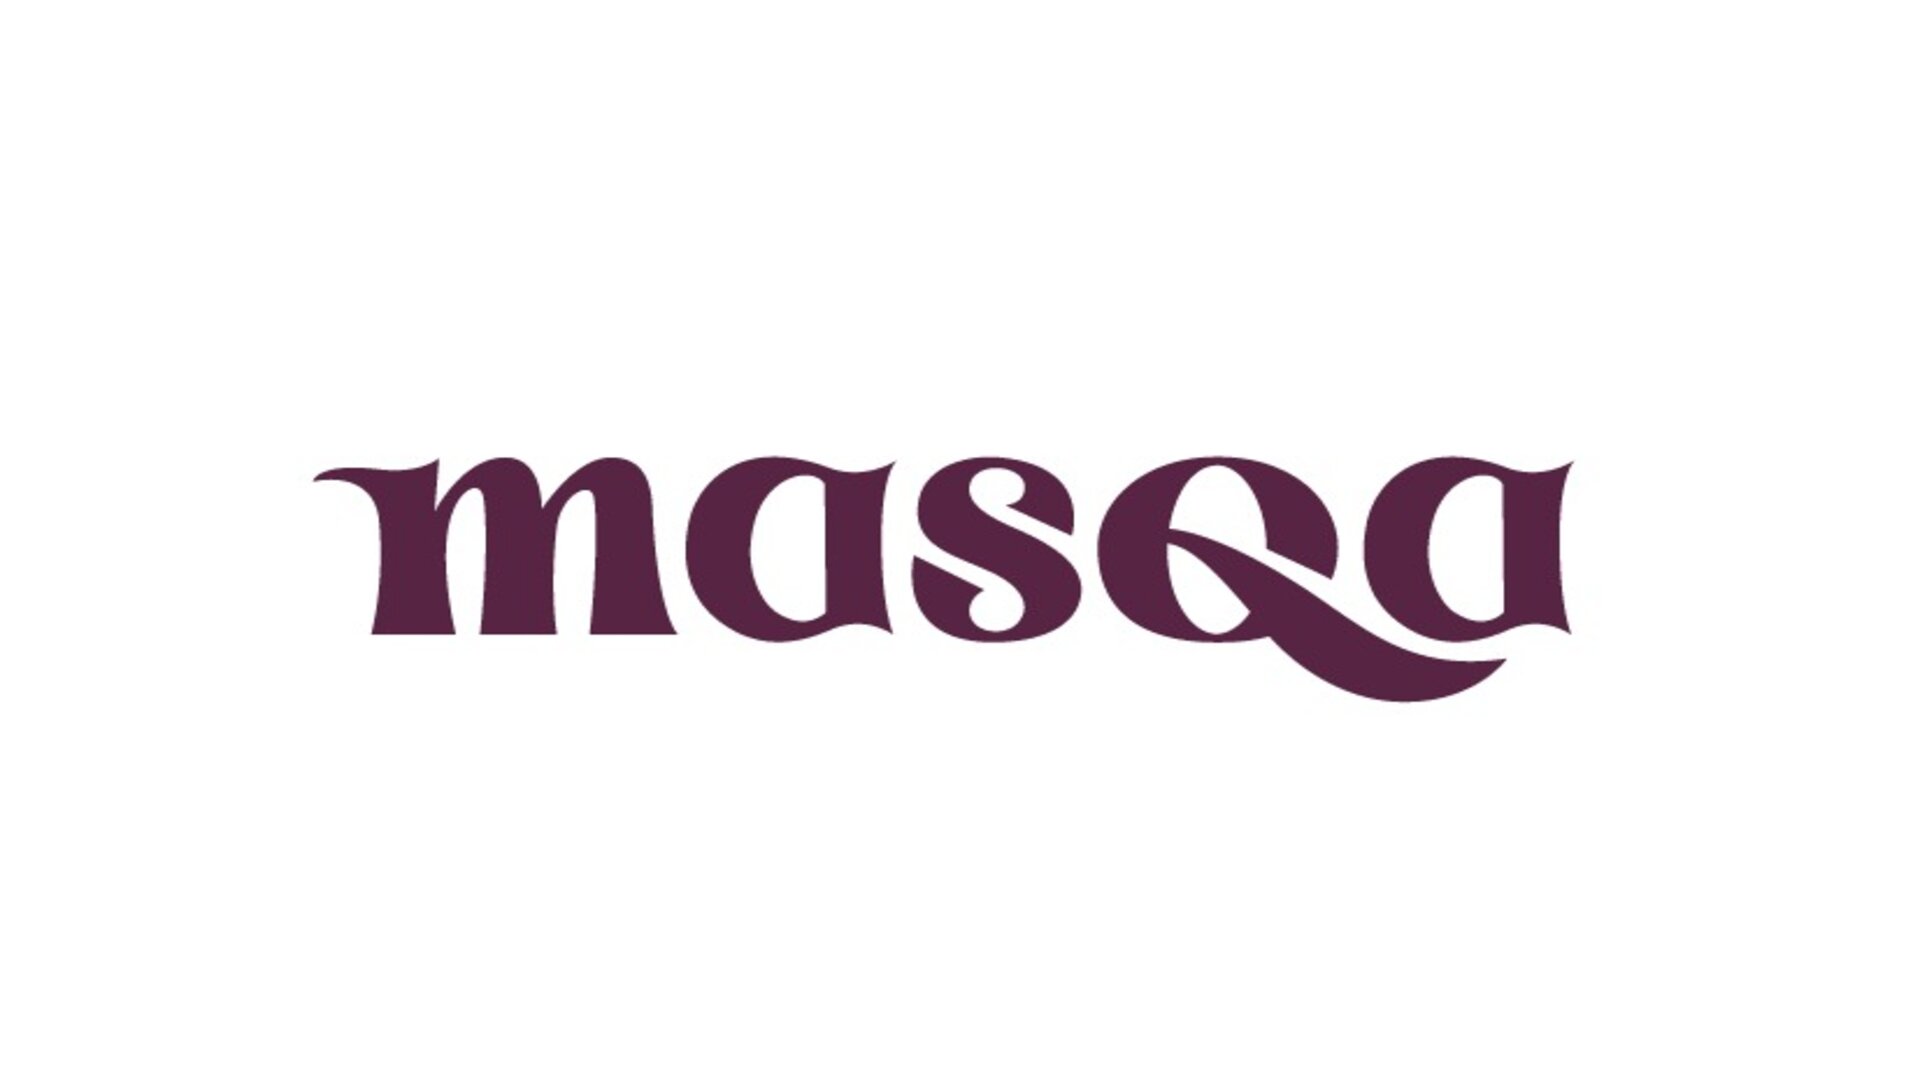 Join Ventures launches new D2C brand Masqa and keen on further investment